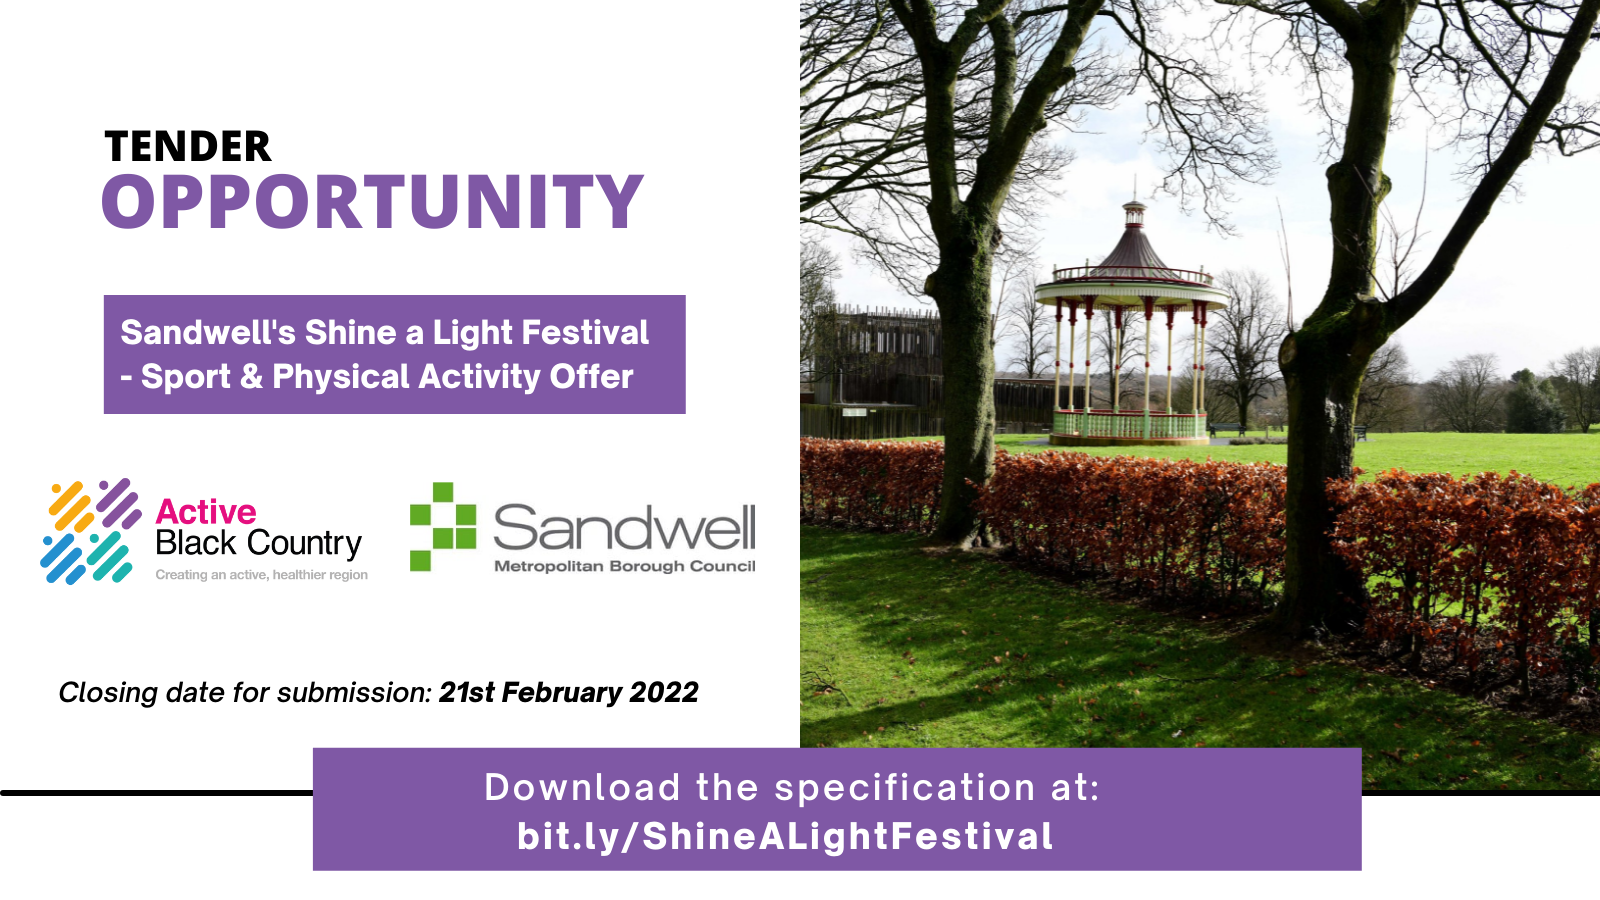 Tender Opportunity -Sandwell’s Shine a Light Festival - Sport and Physical Activity Offer